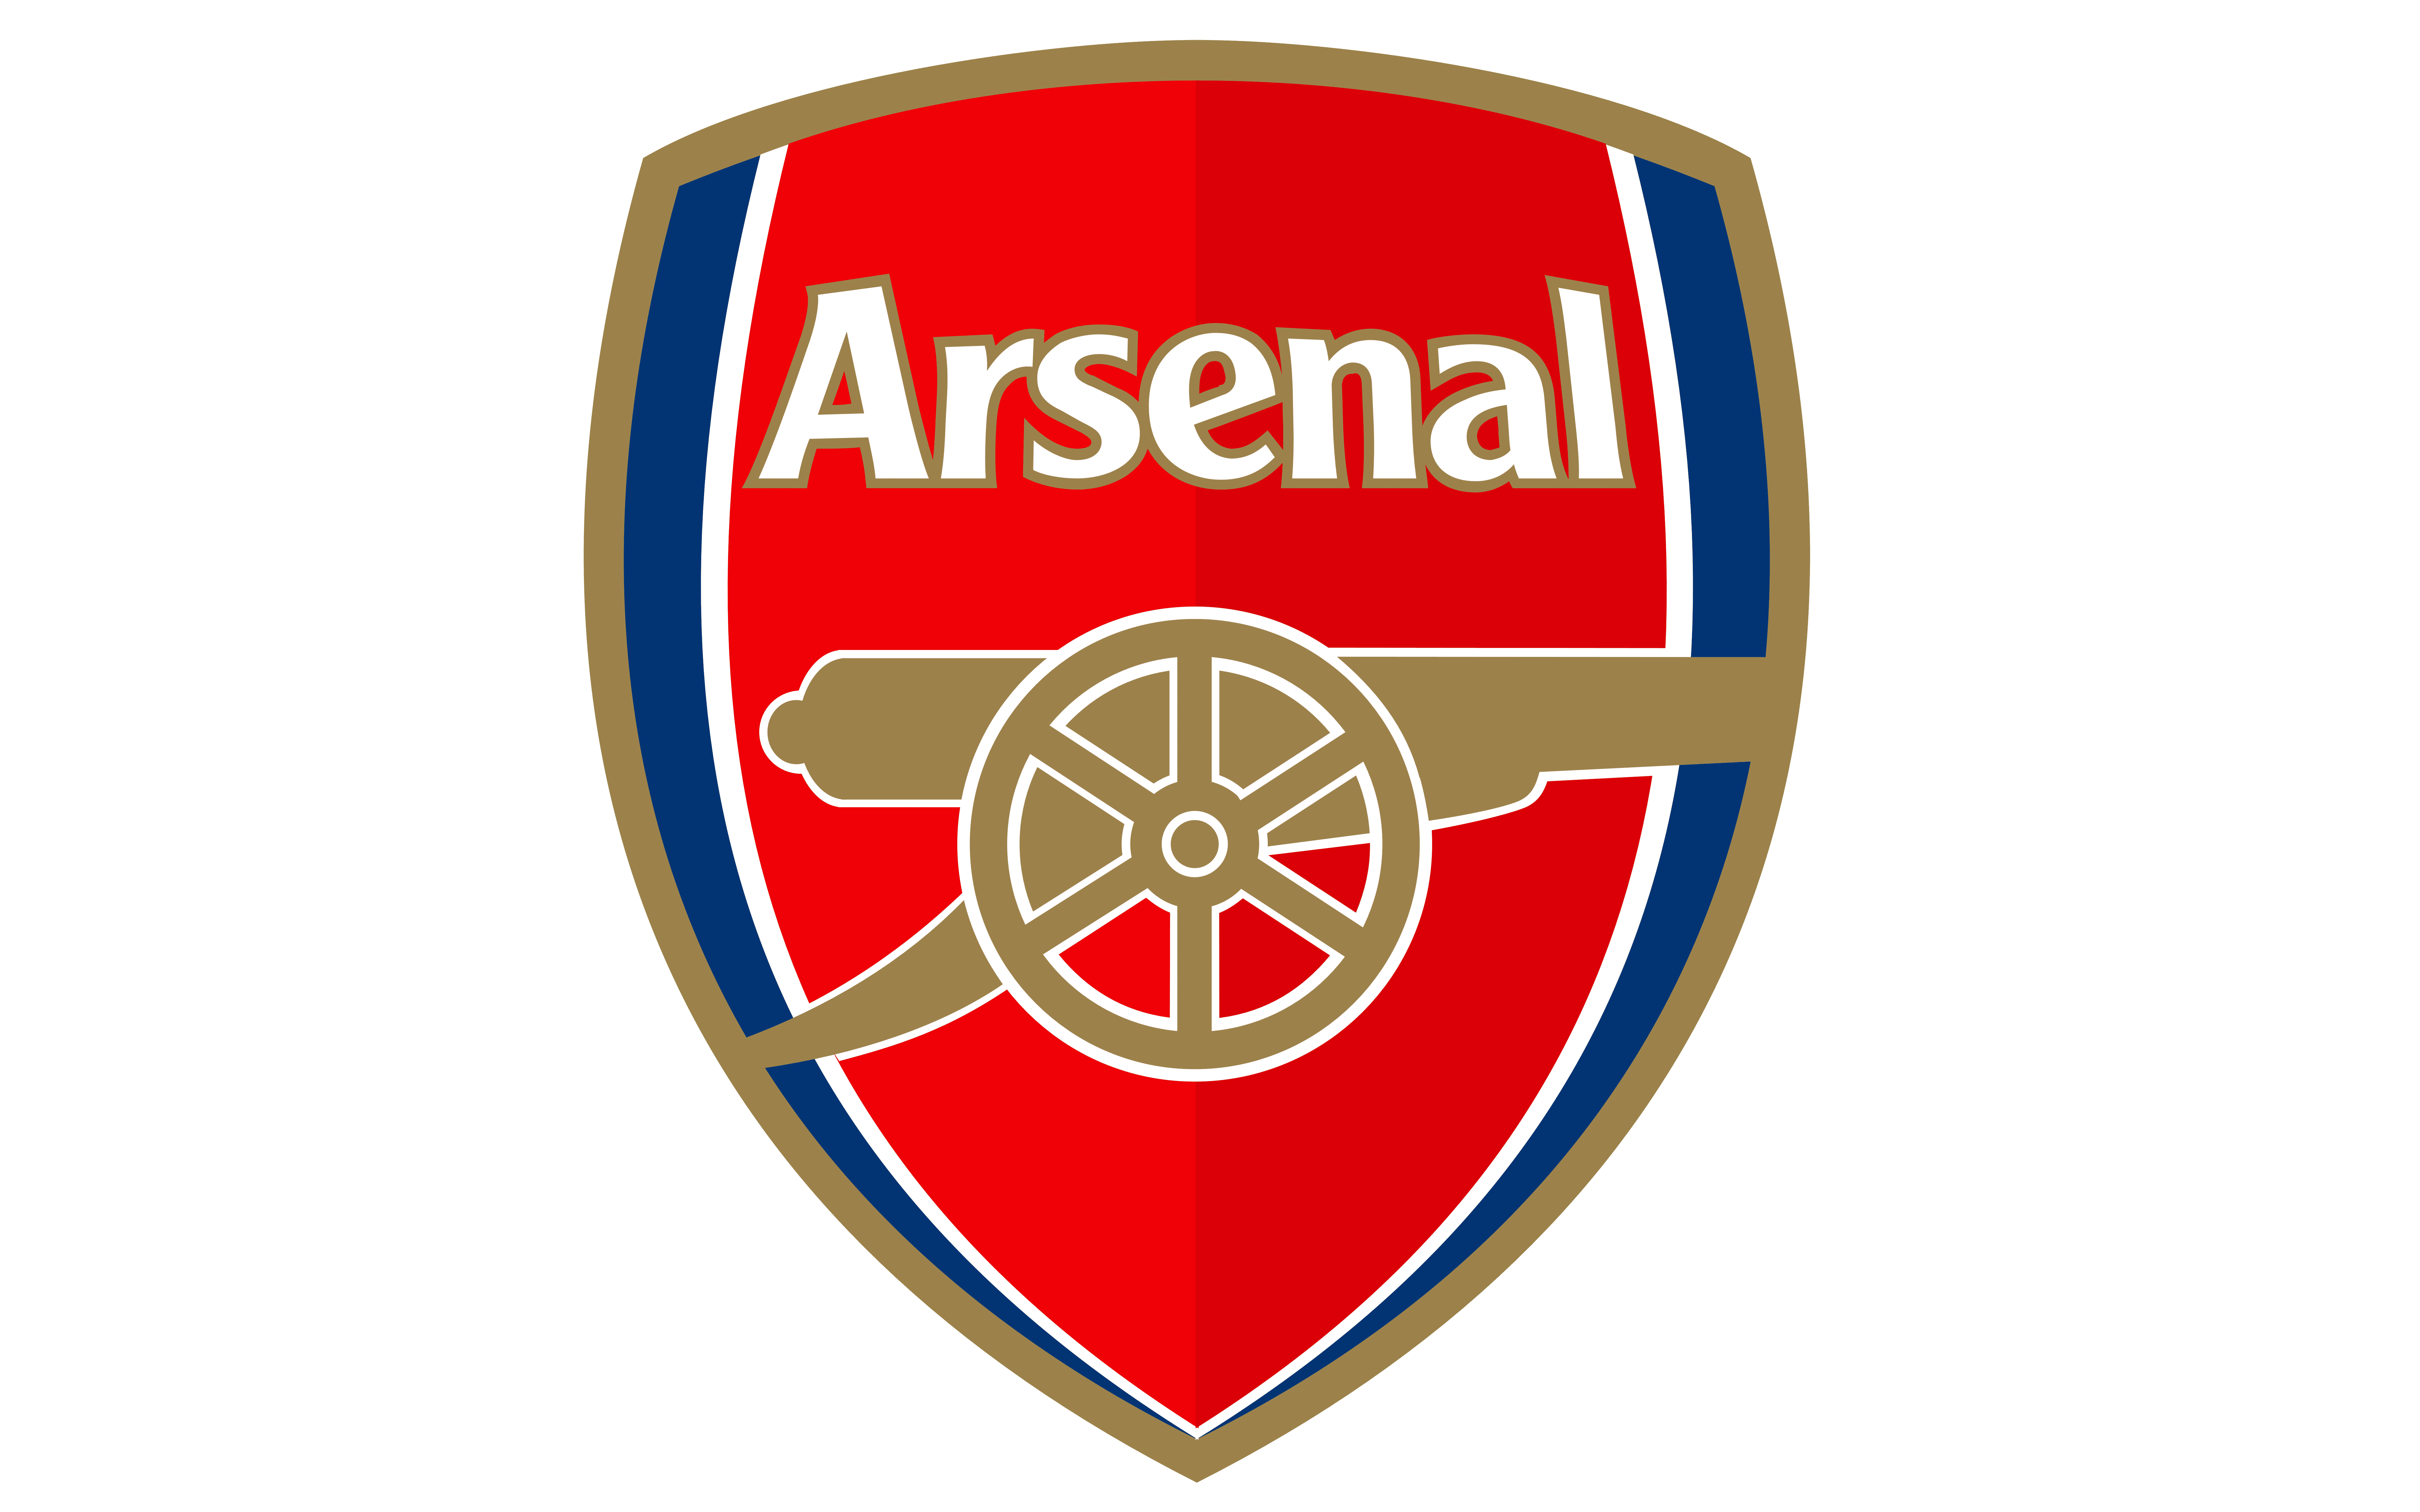 Arsenal Logo, Arsenal Symbol Meaning, History and Evolution